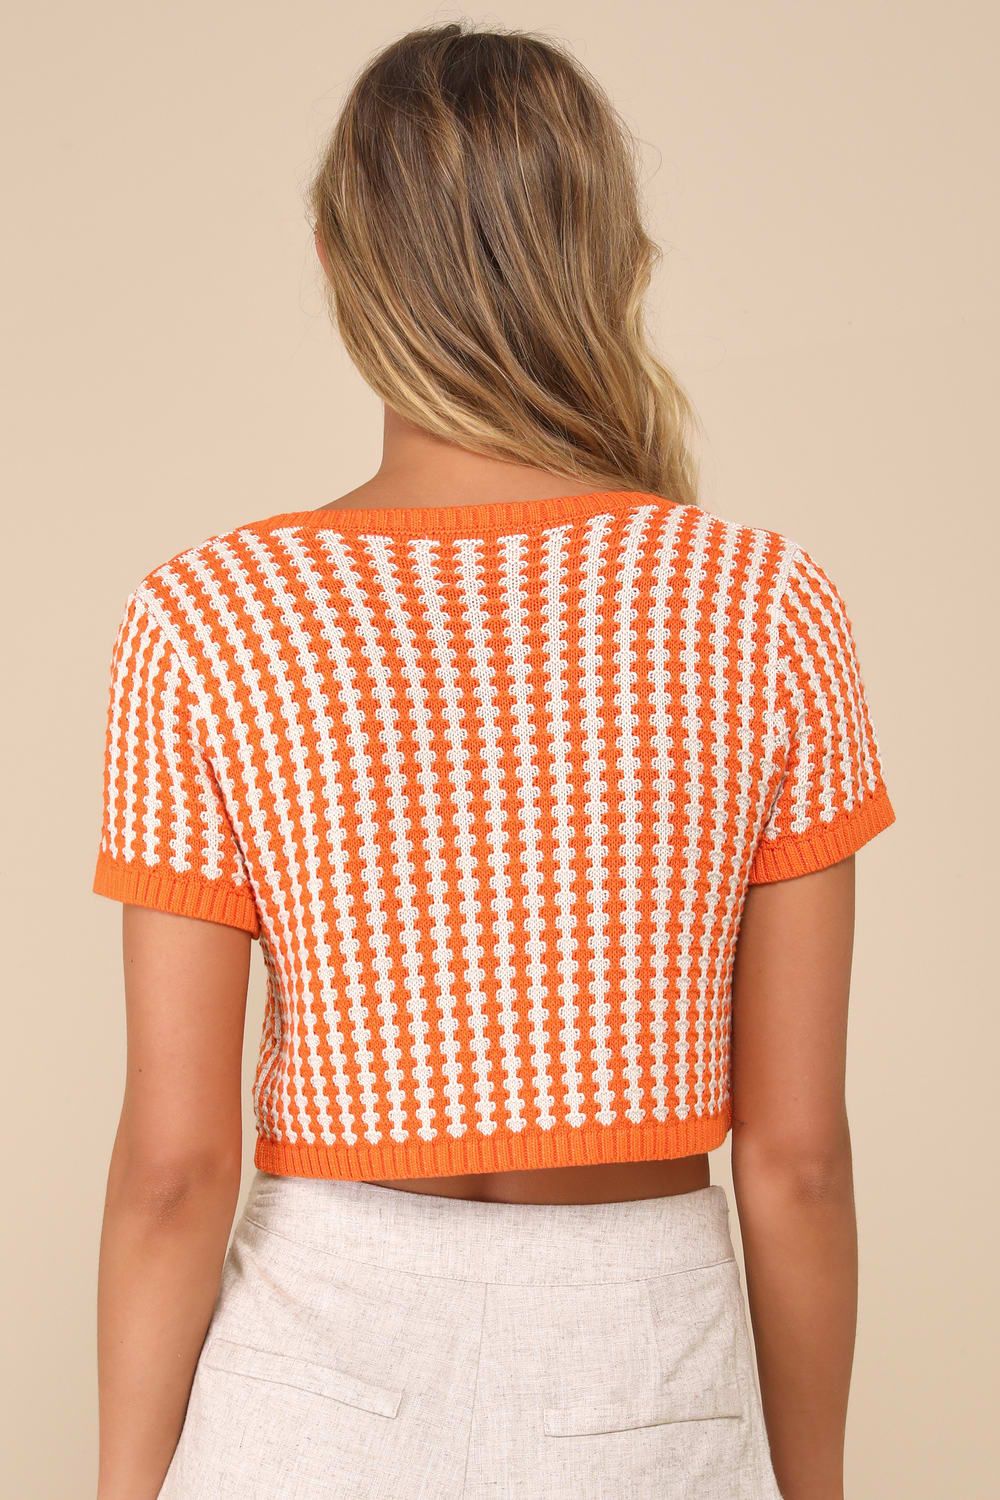 Amore Orange and White Lace-Up Short Sleeve Cropped Sweater Top | Lulus